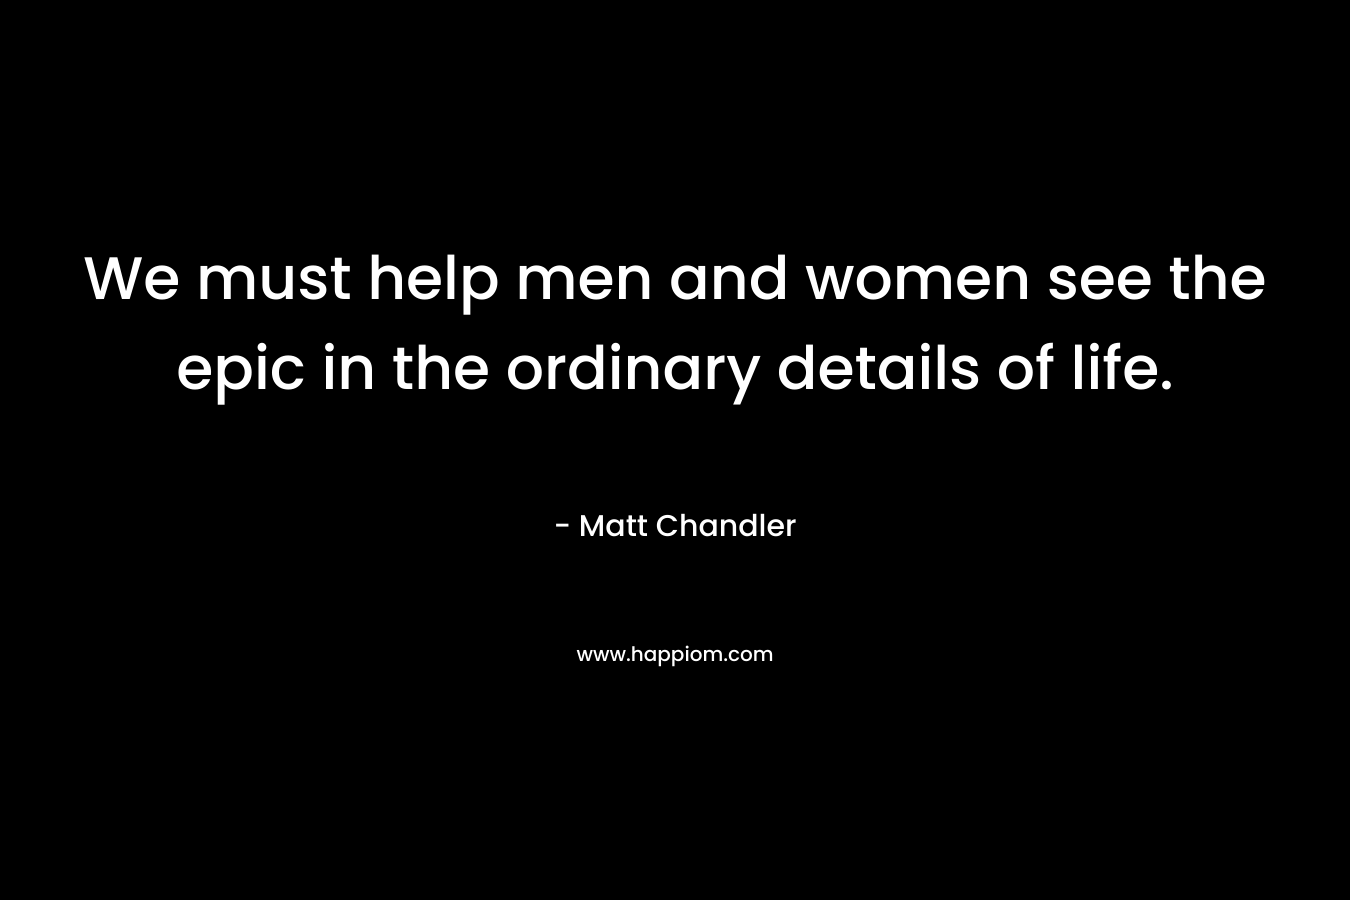 We must help men and women see the epic in the ordinary details of life.